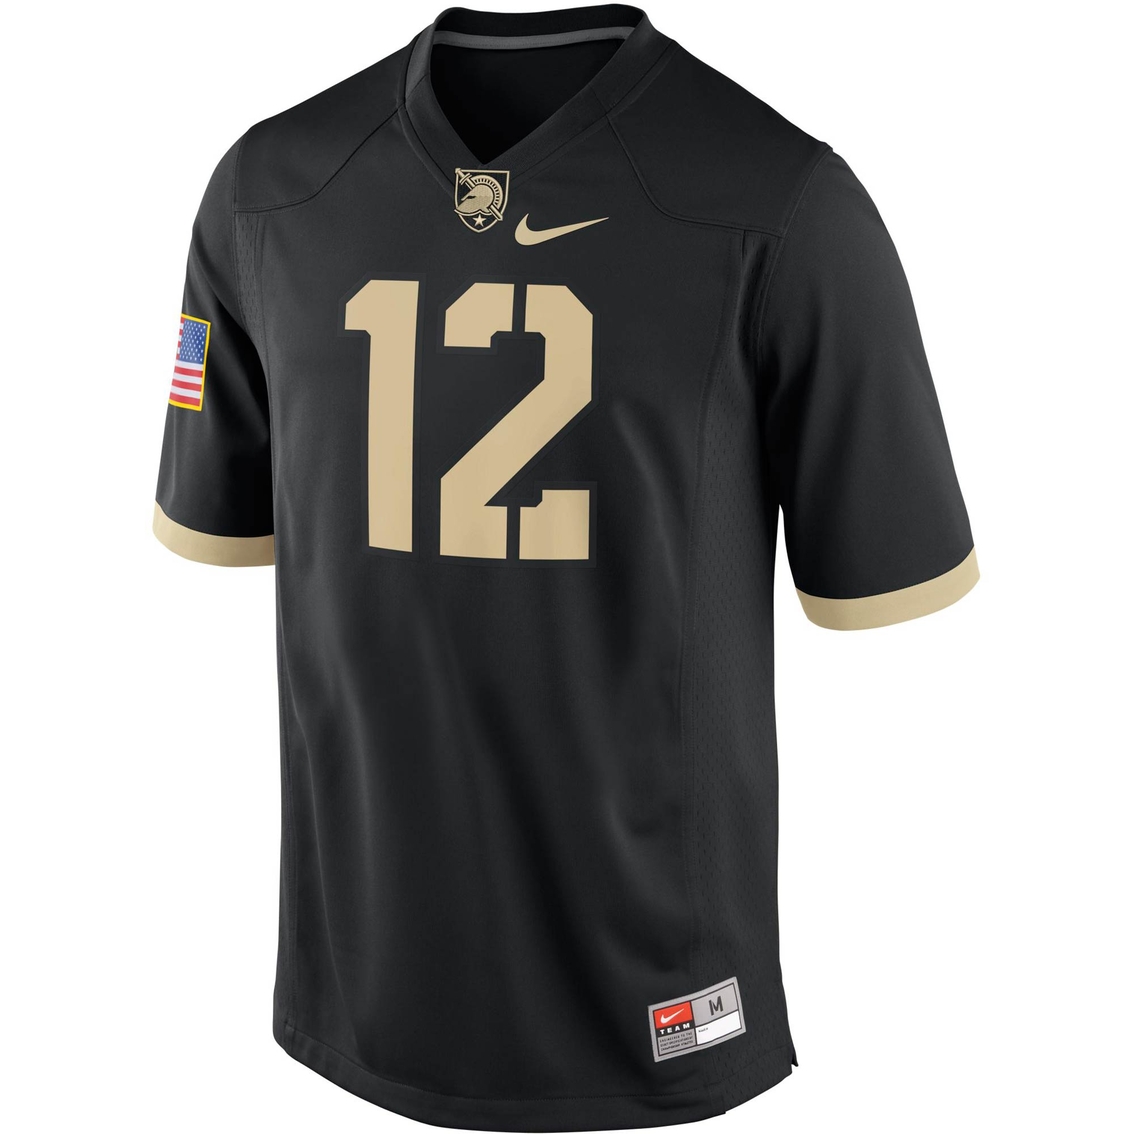 Nike Ncaa Army West Point Black Knights Football Game Jersey Clothing